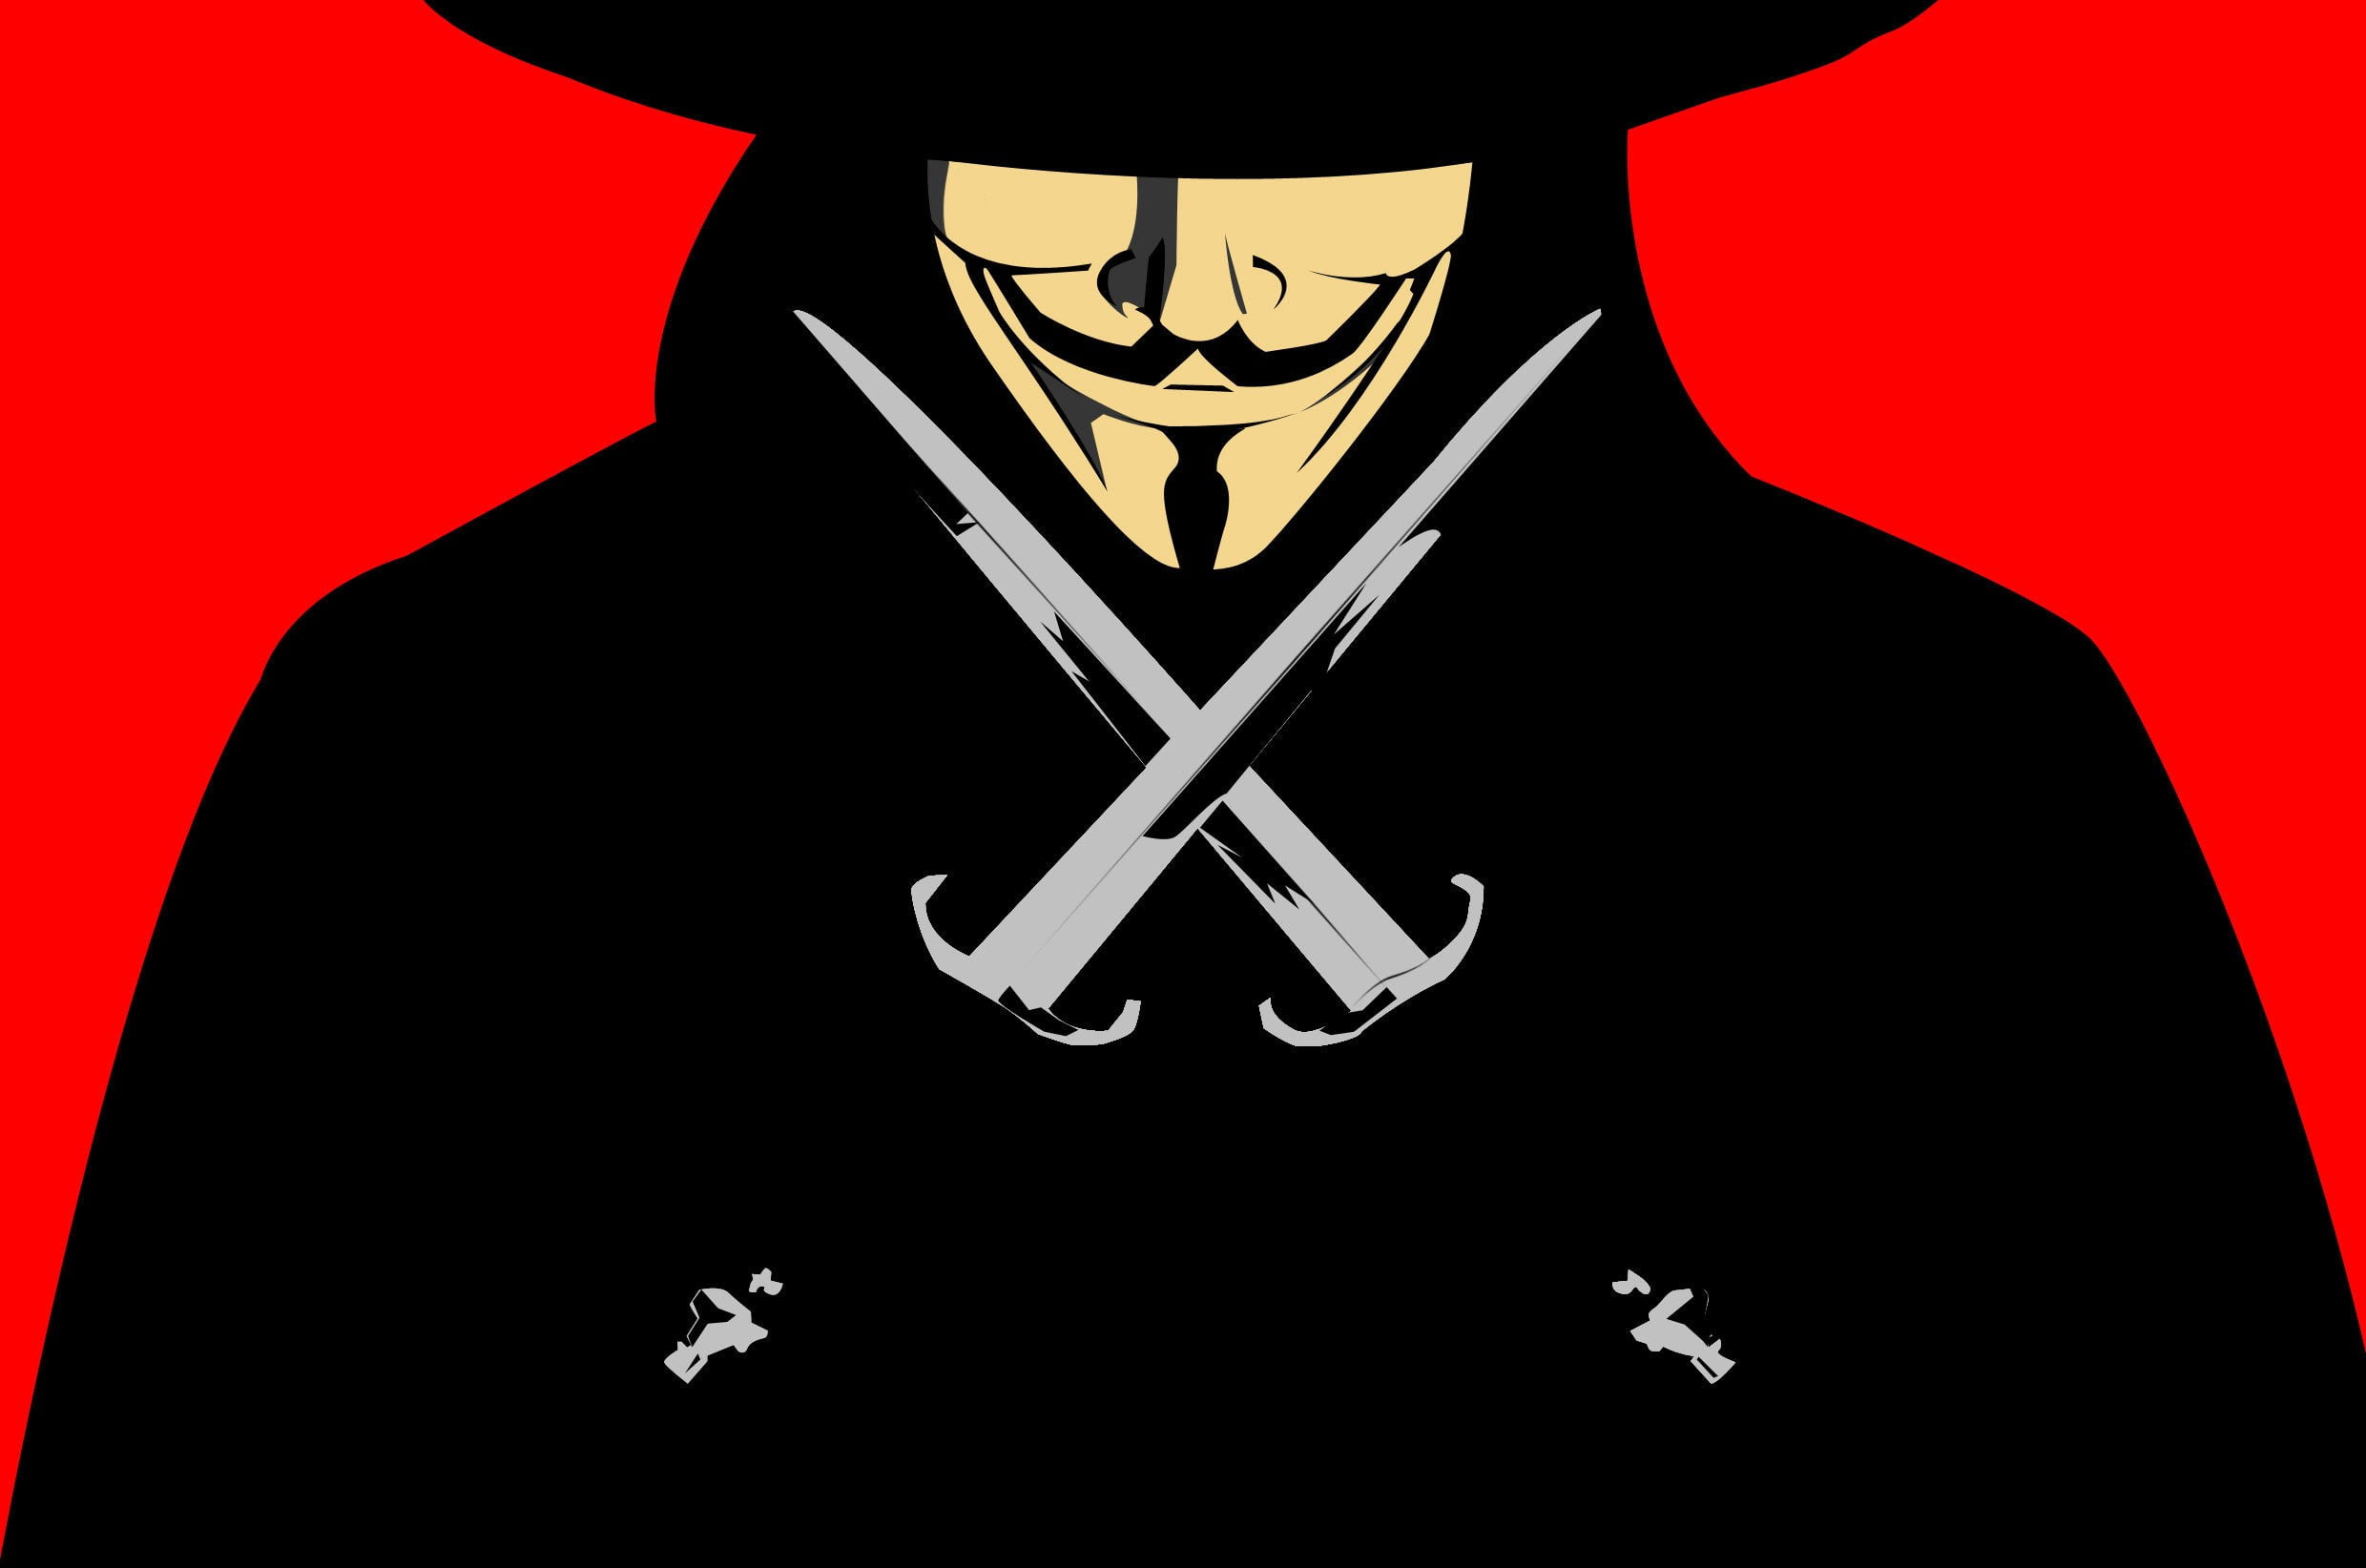 V for Vendetta Fawkes Guy digital wallpaper, movies, one person